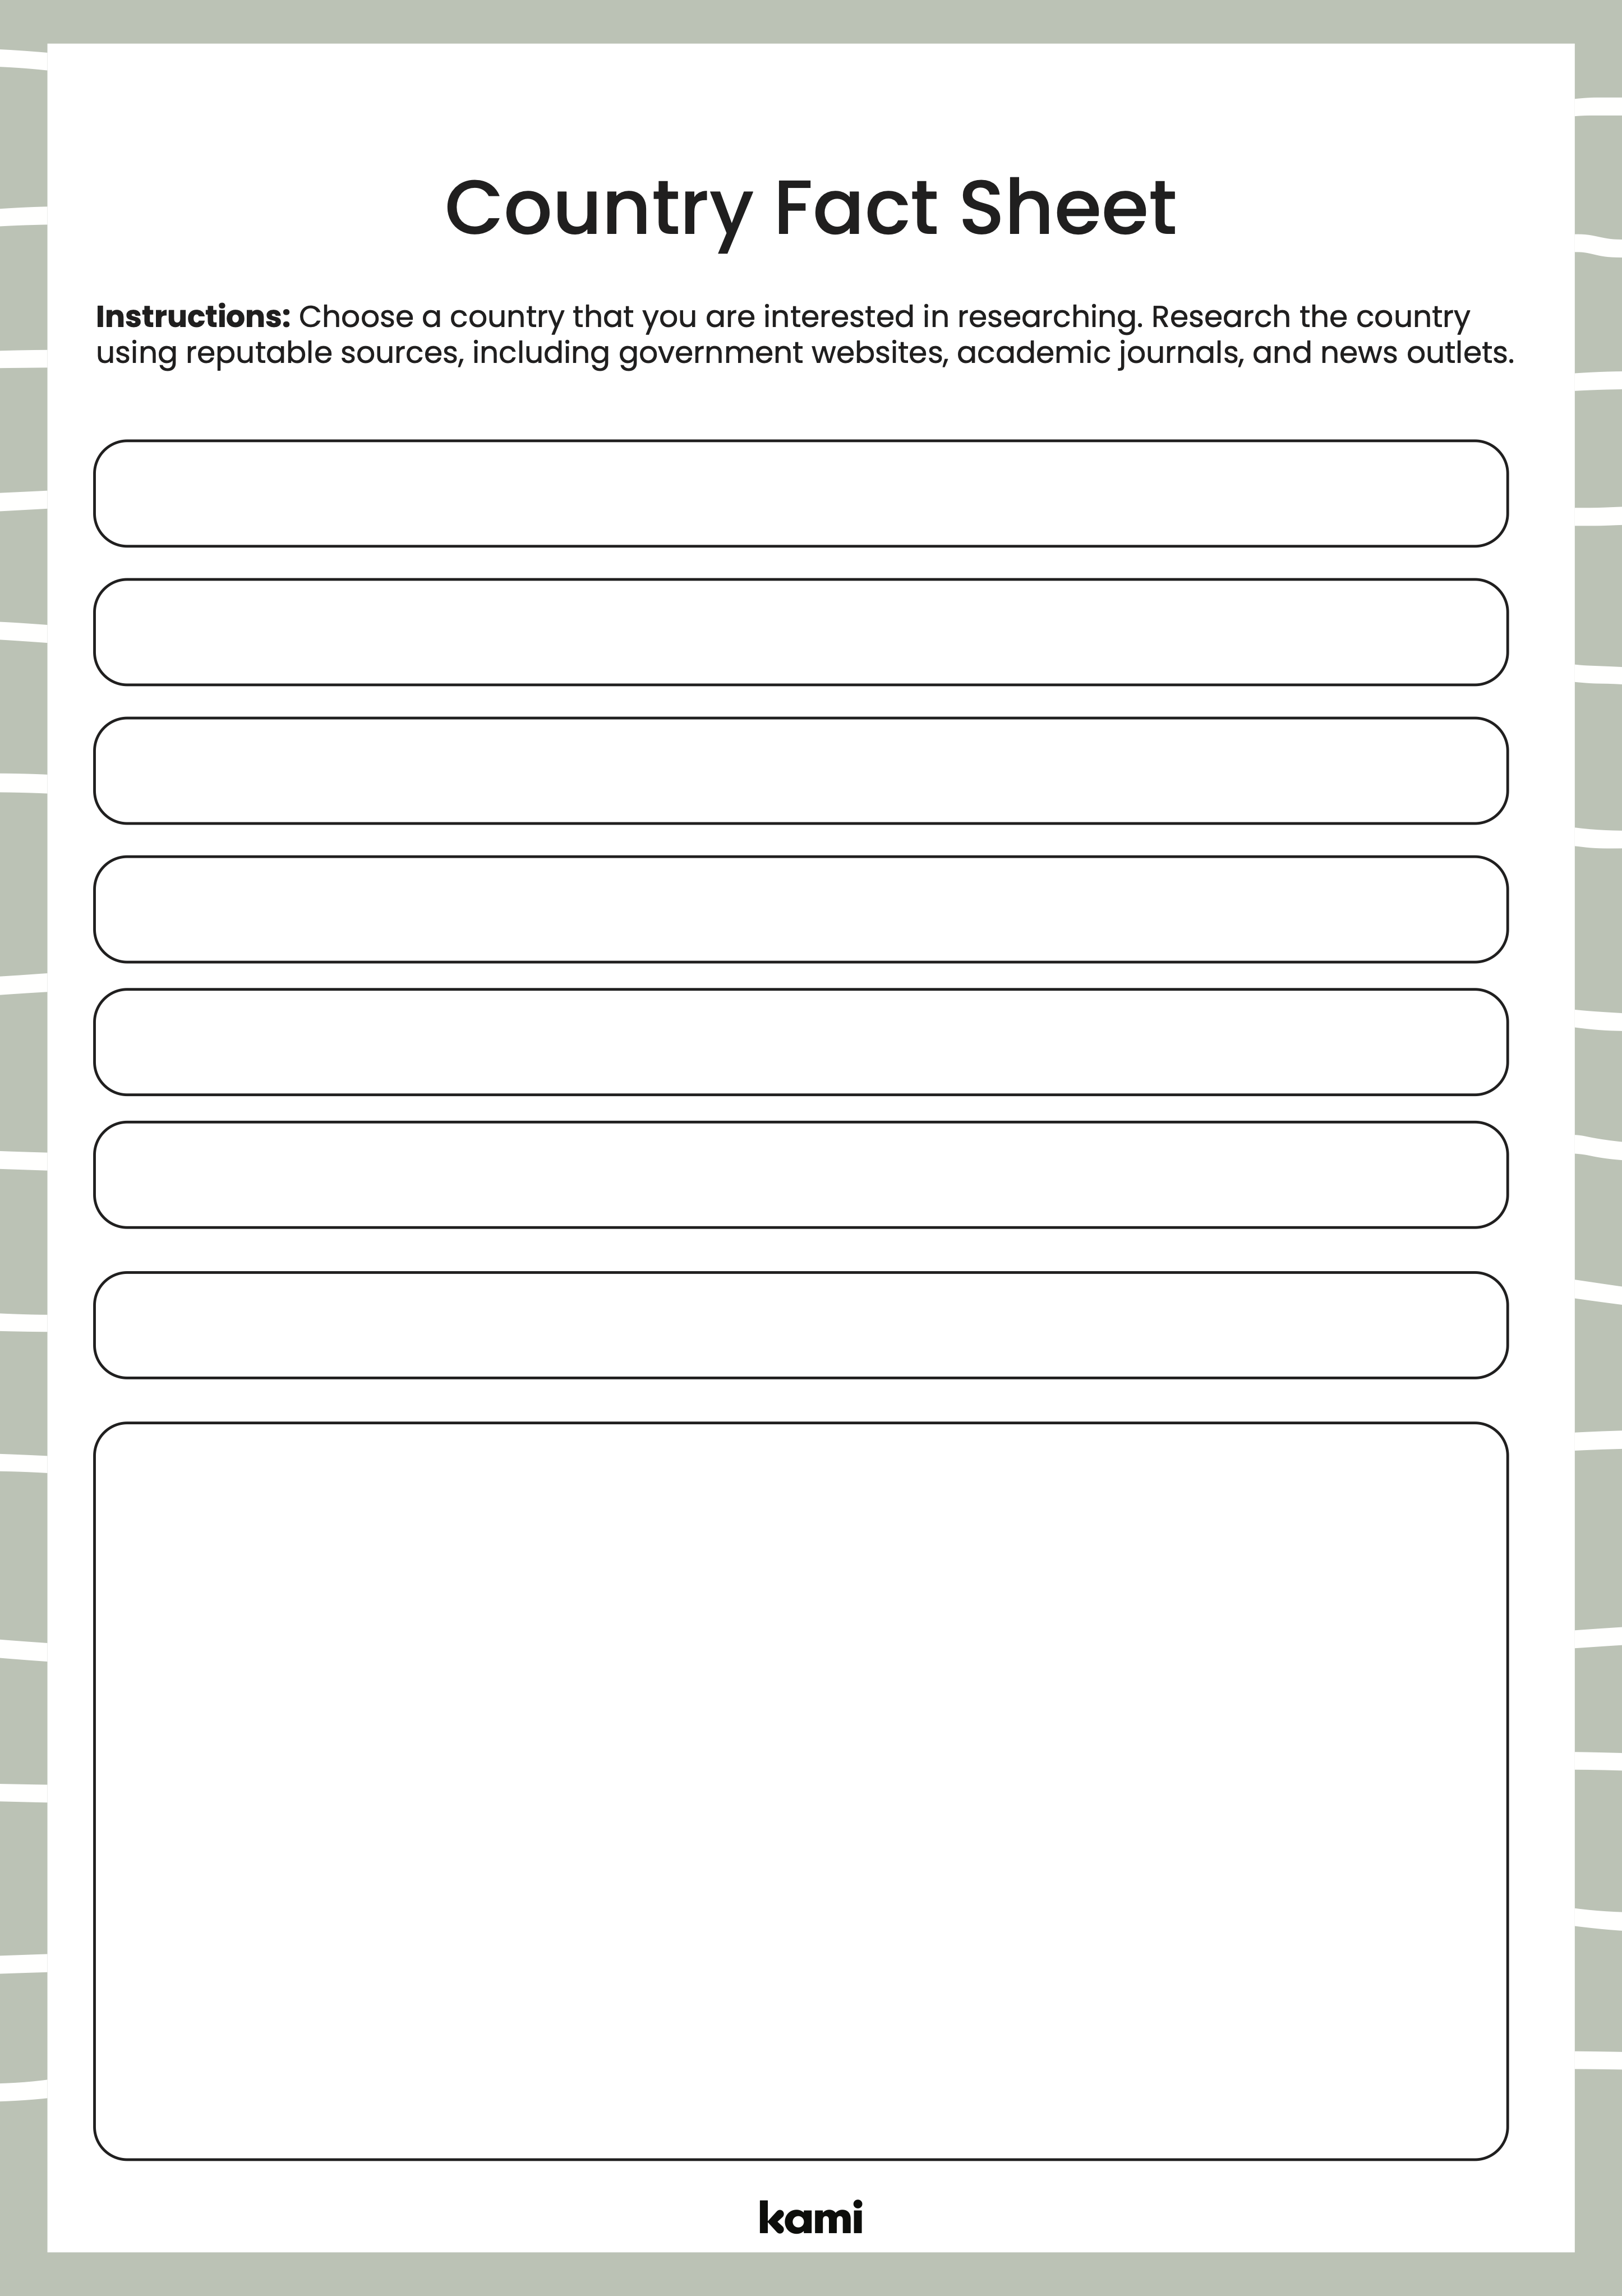 Country Fact Sheet Blank for Teachers Perfect for grades 10th, 11th